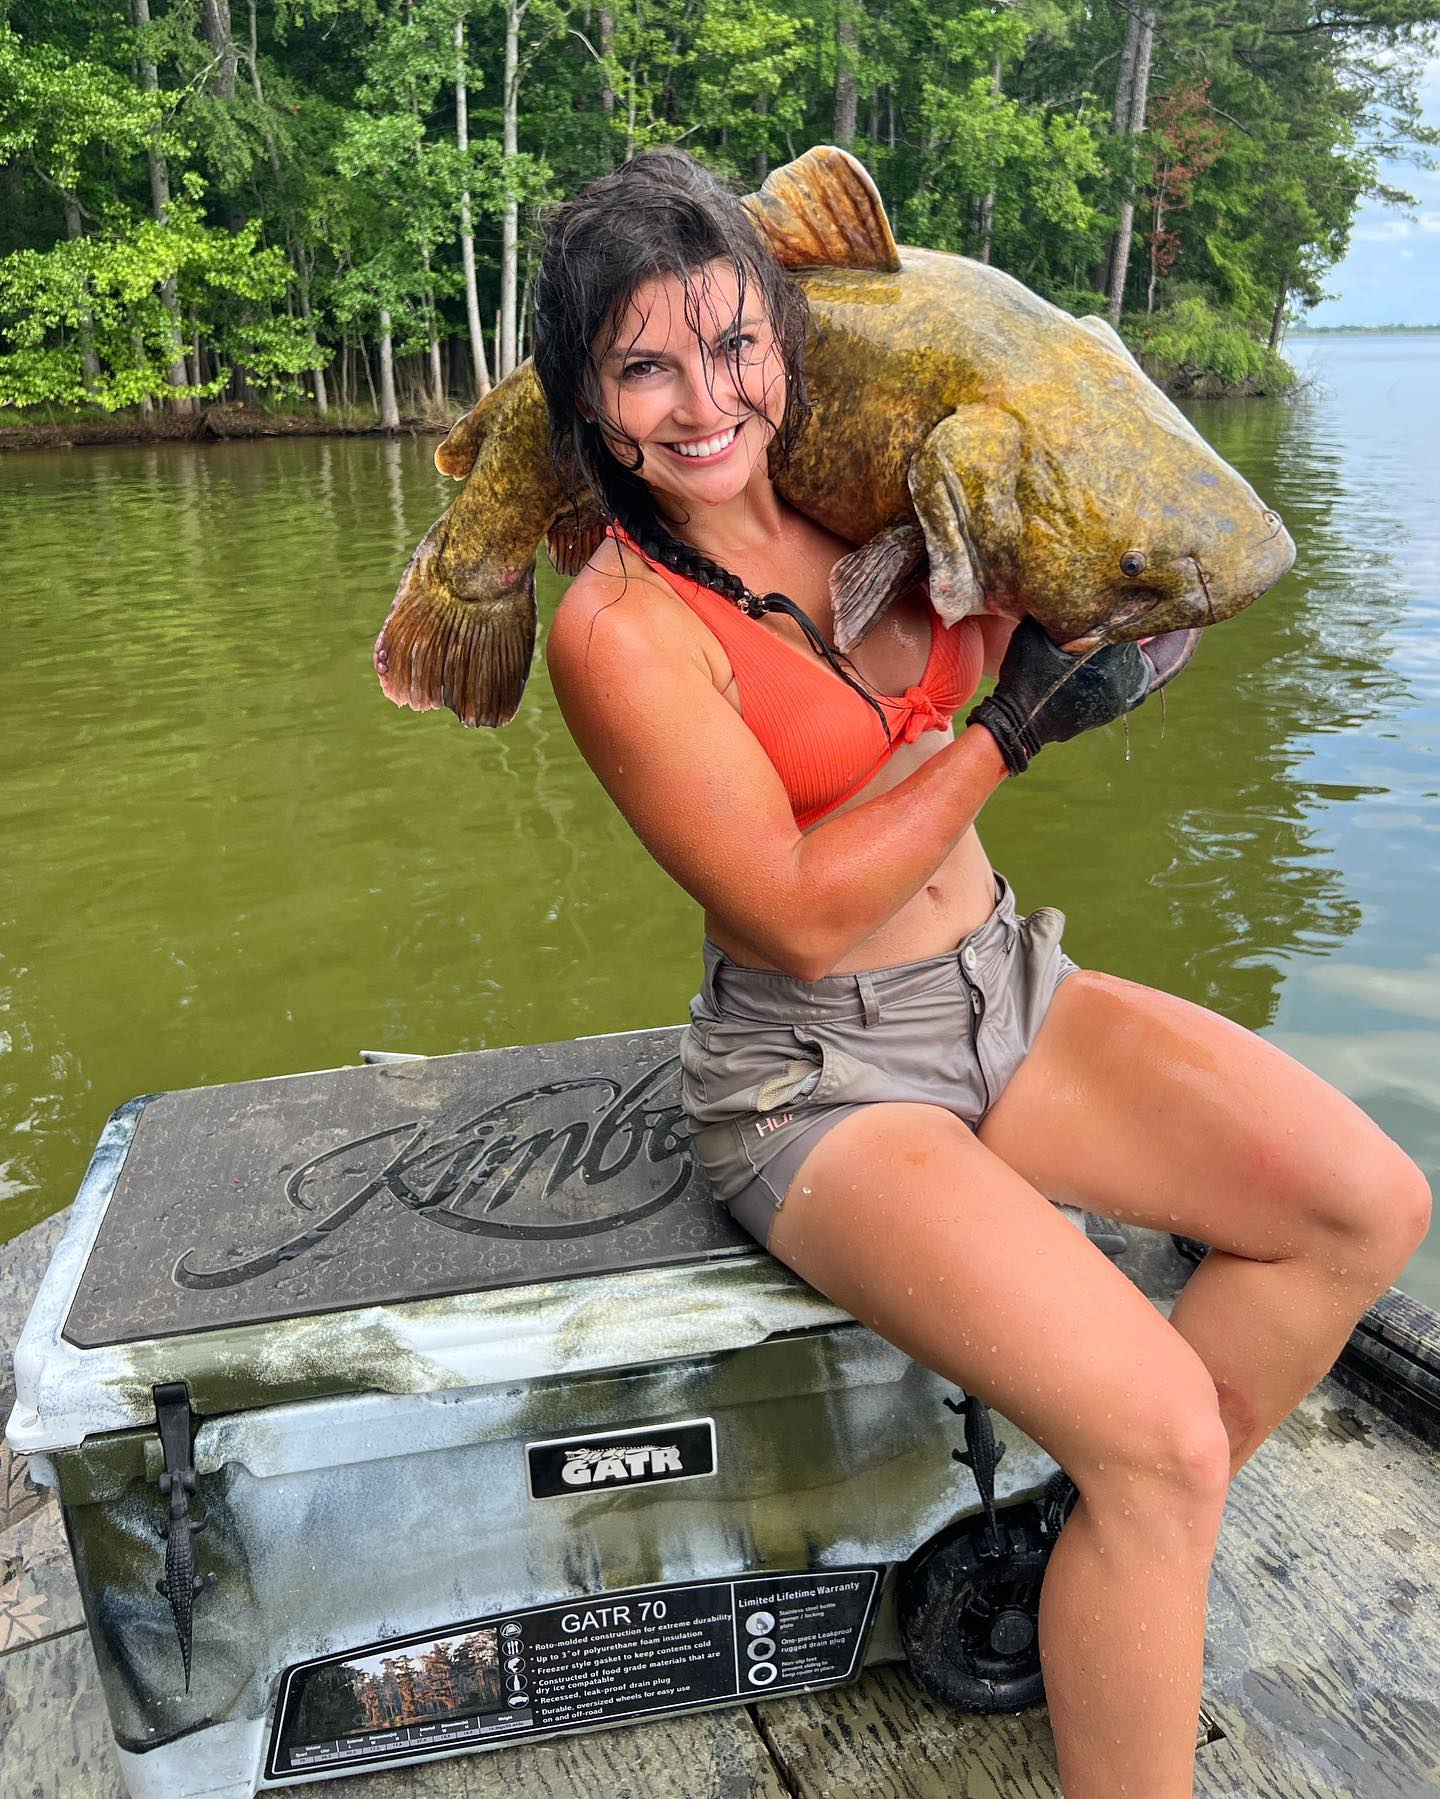 Barron posts glamorous pictures of herself holding monstrous catfish